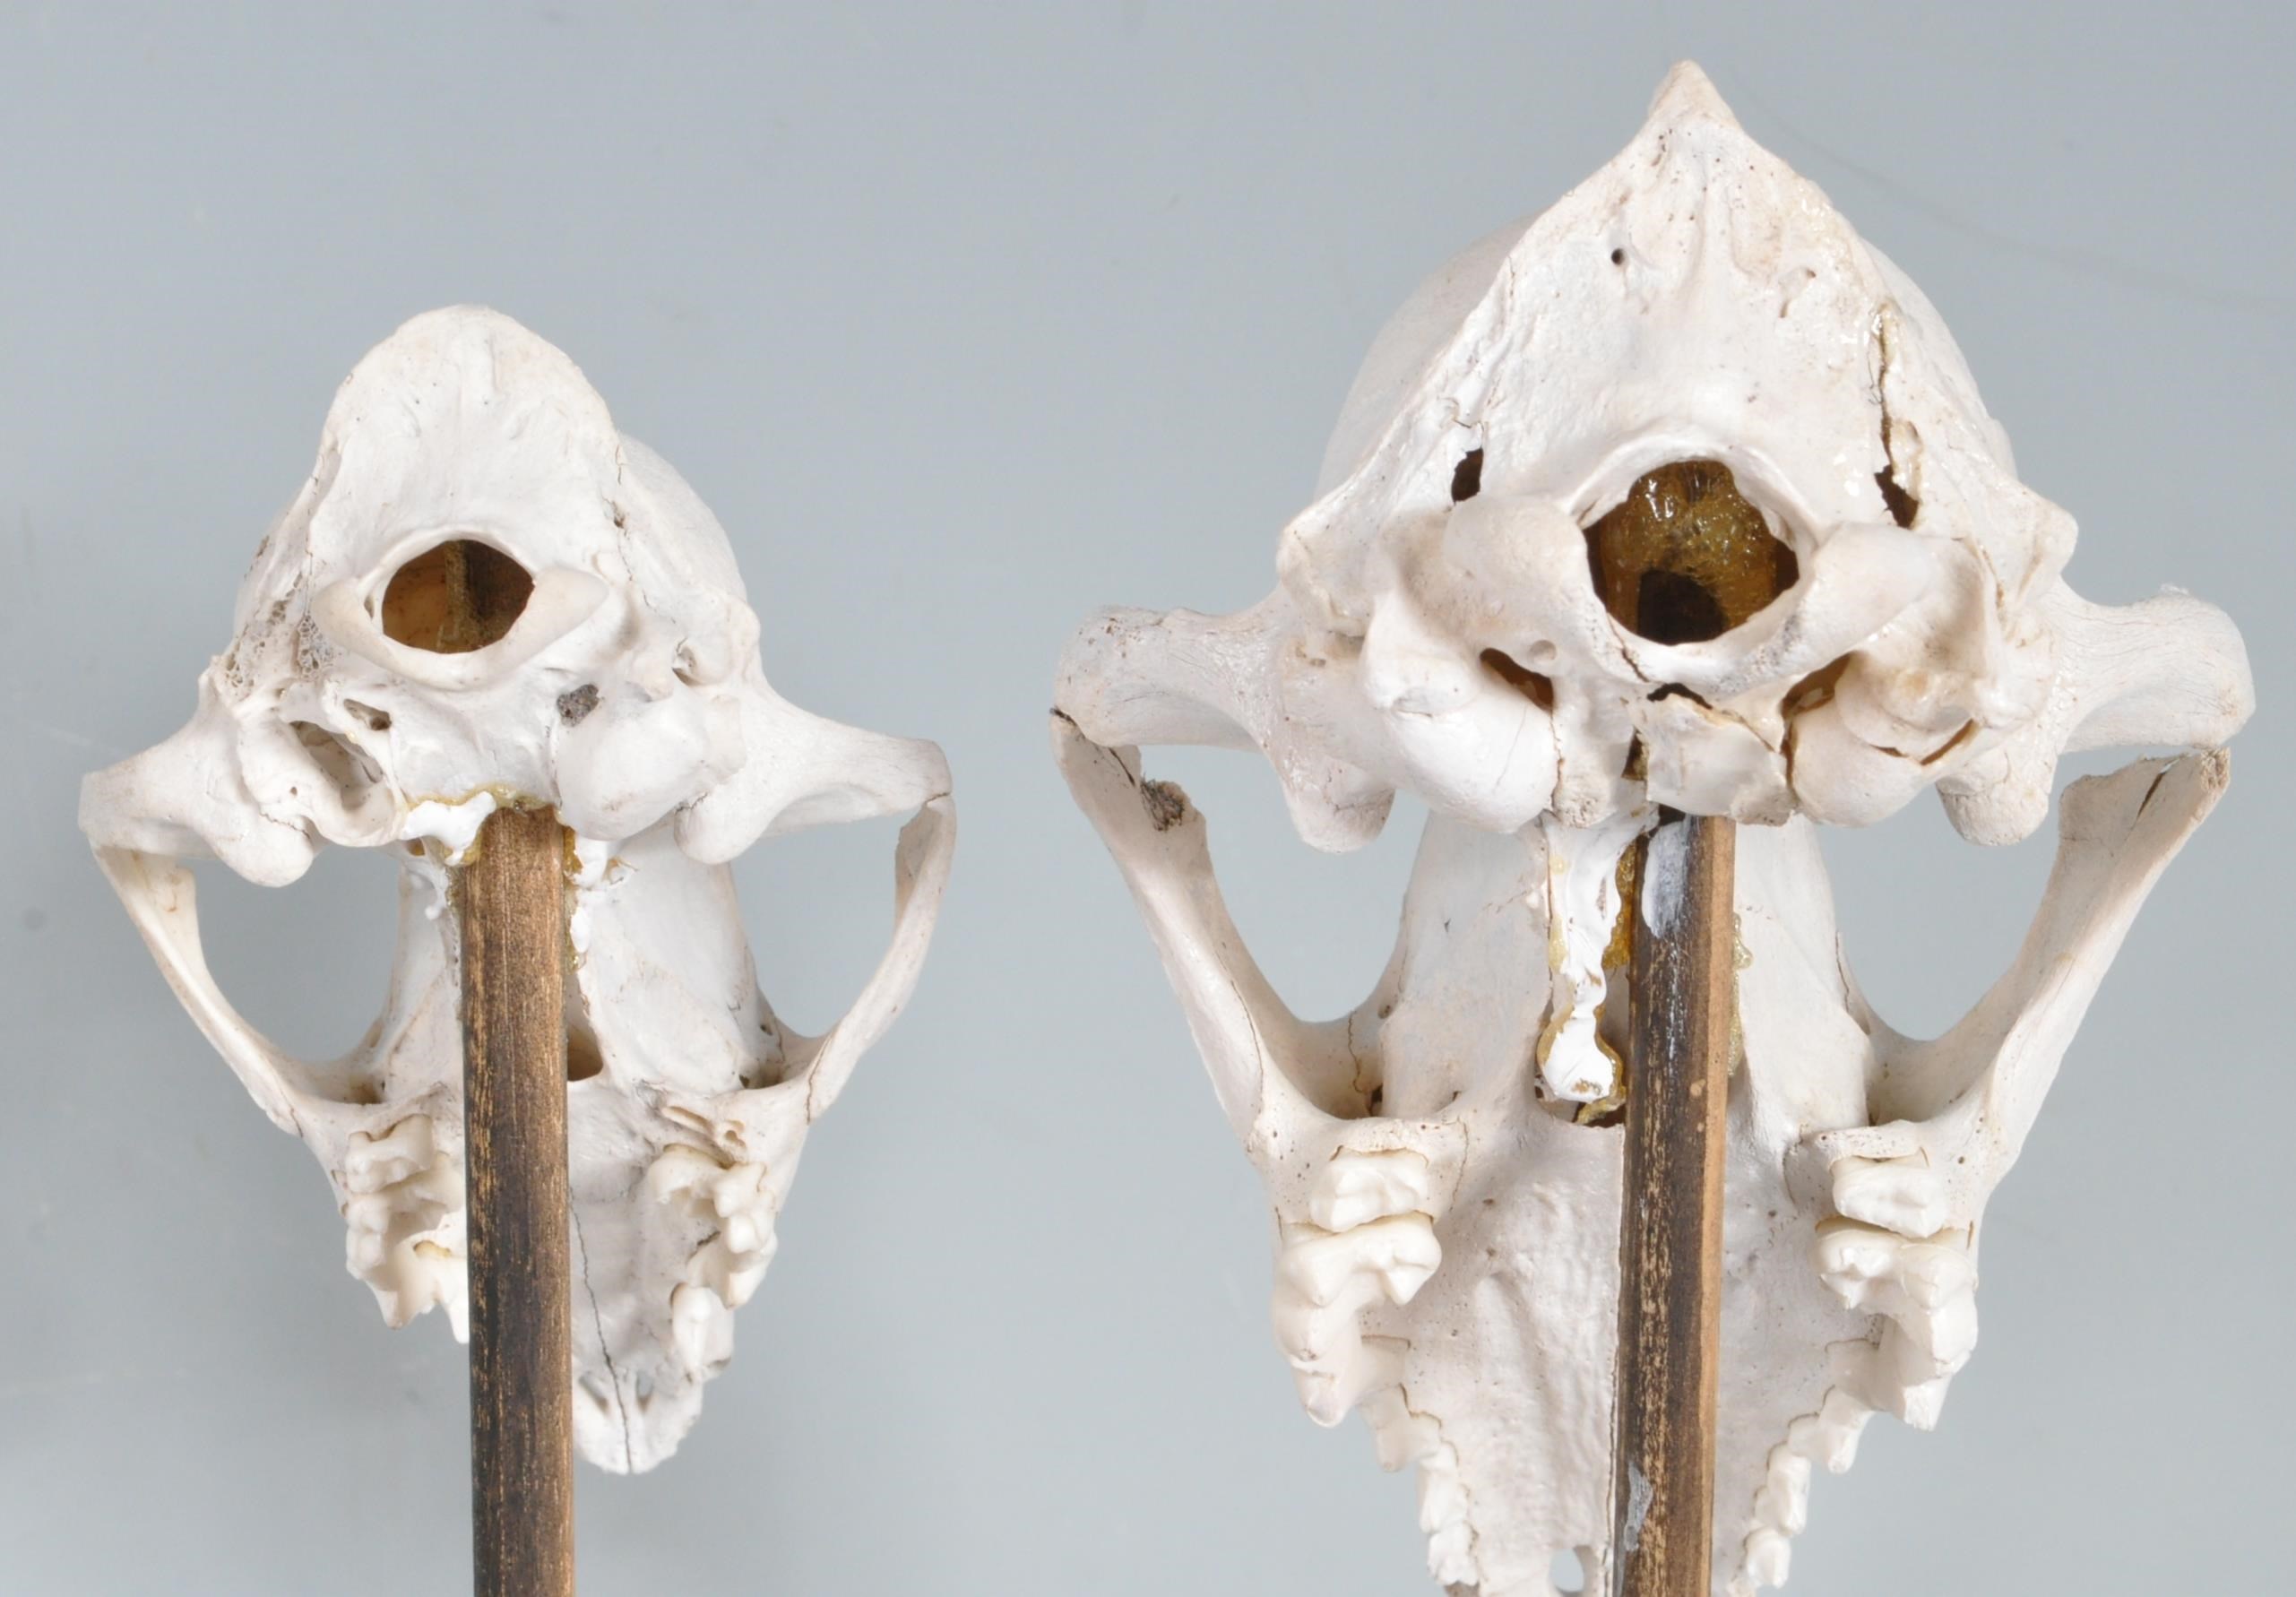 TWO MOUNTED FOXES SKULLS - Image 5 of 5